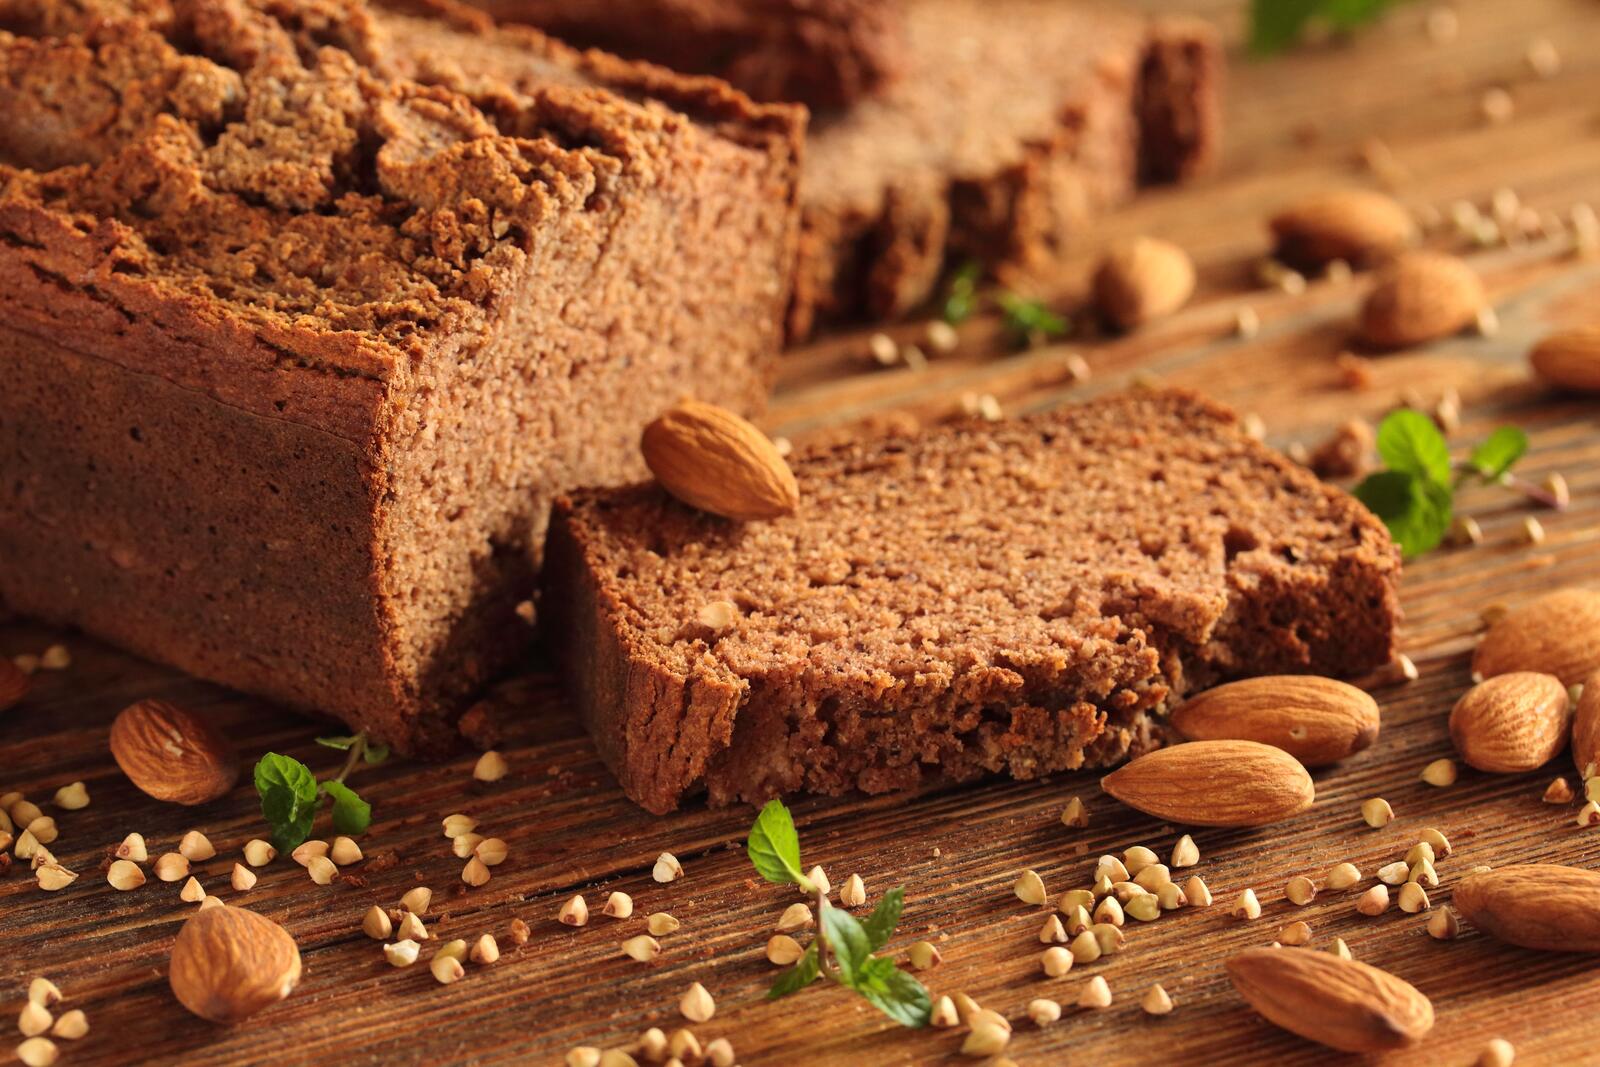 Wallpapers cake chocolate bread almonds on the desktop